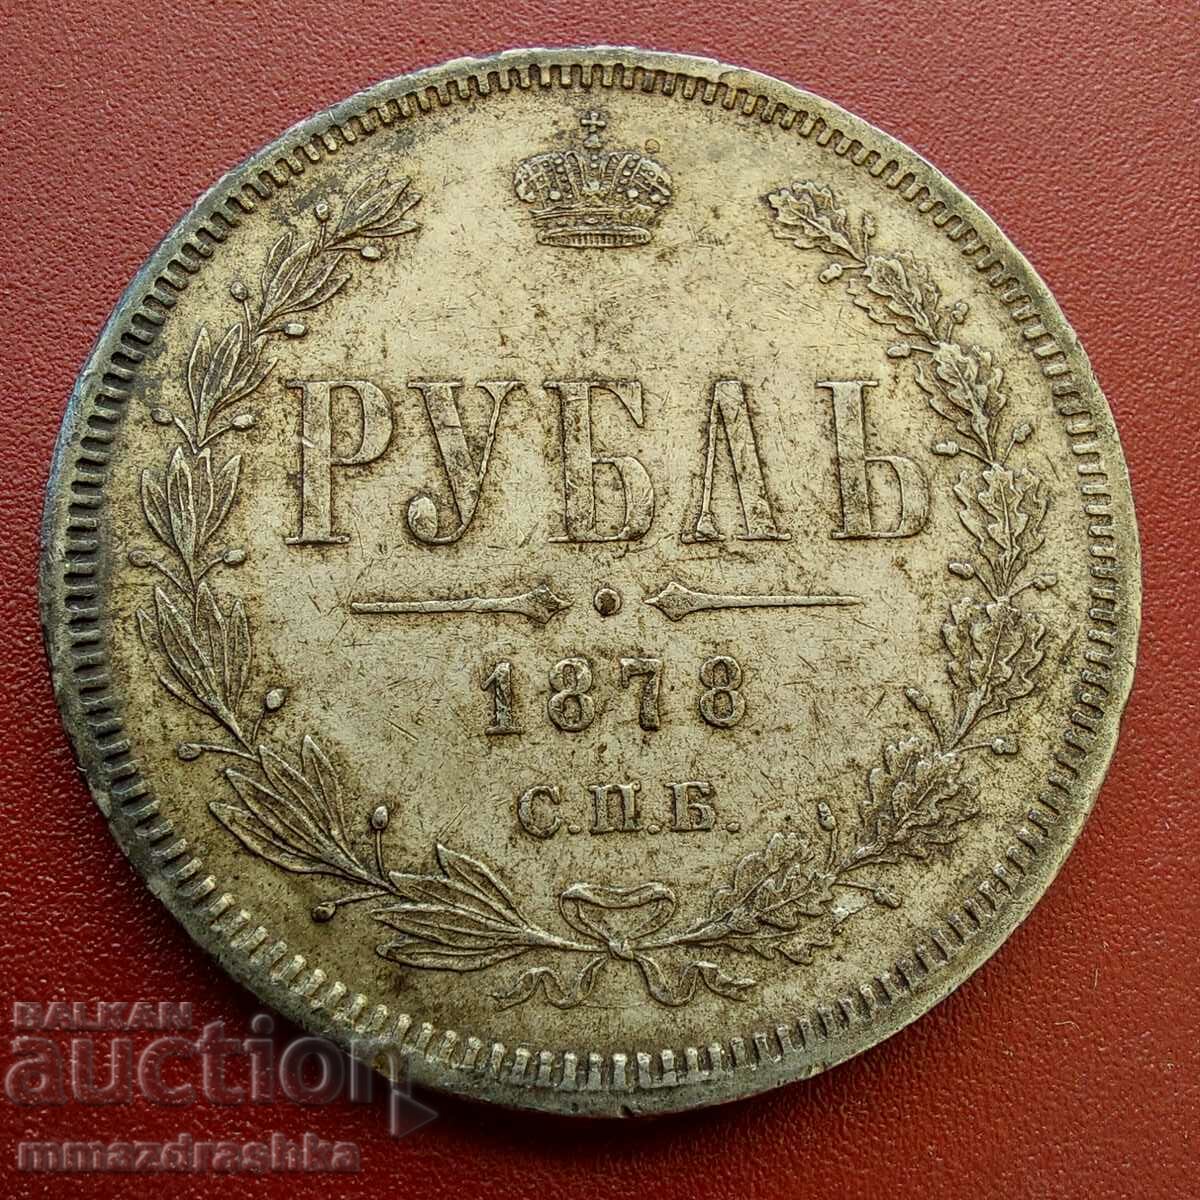 Ruble from 1878, Original